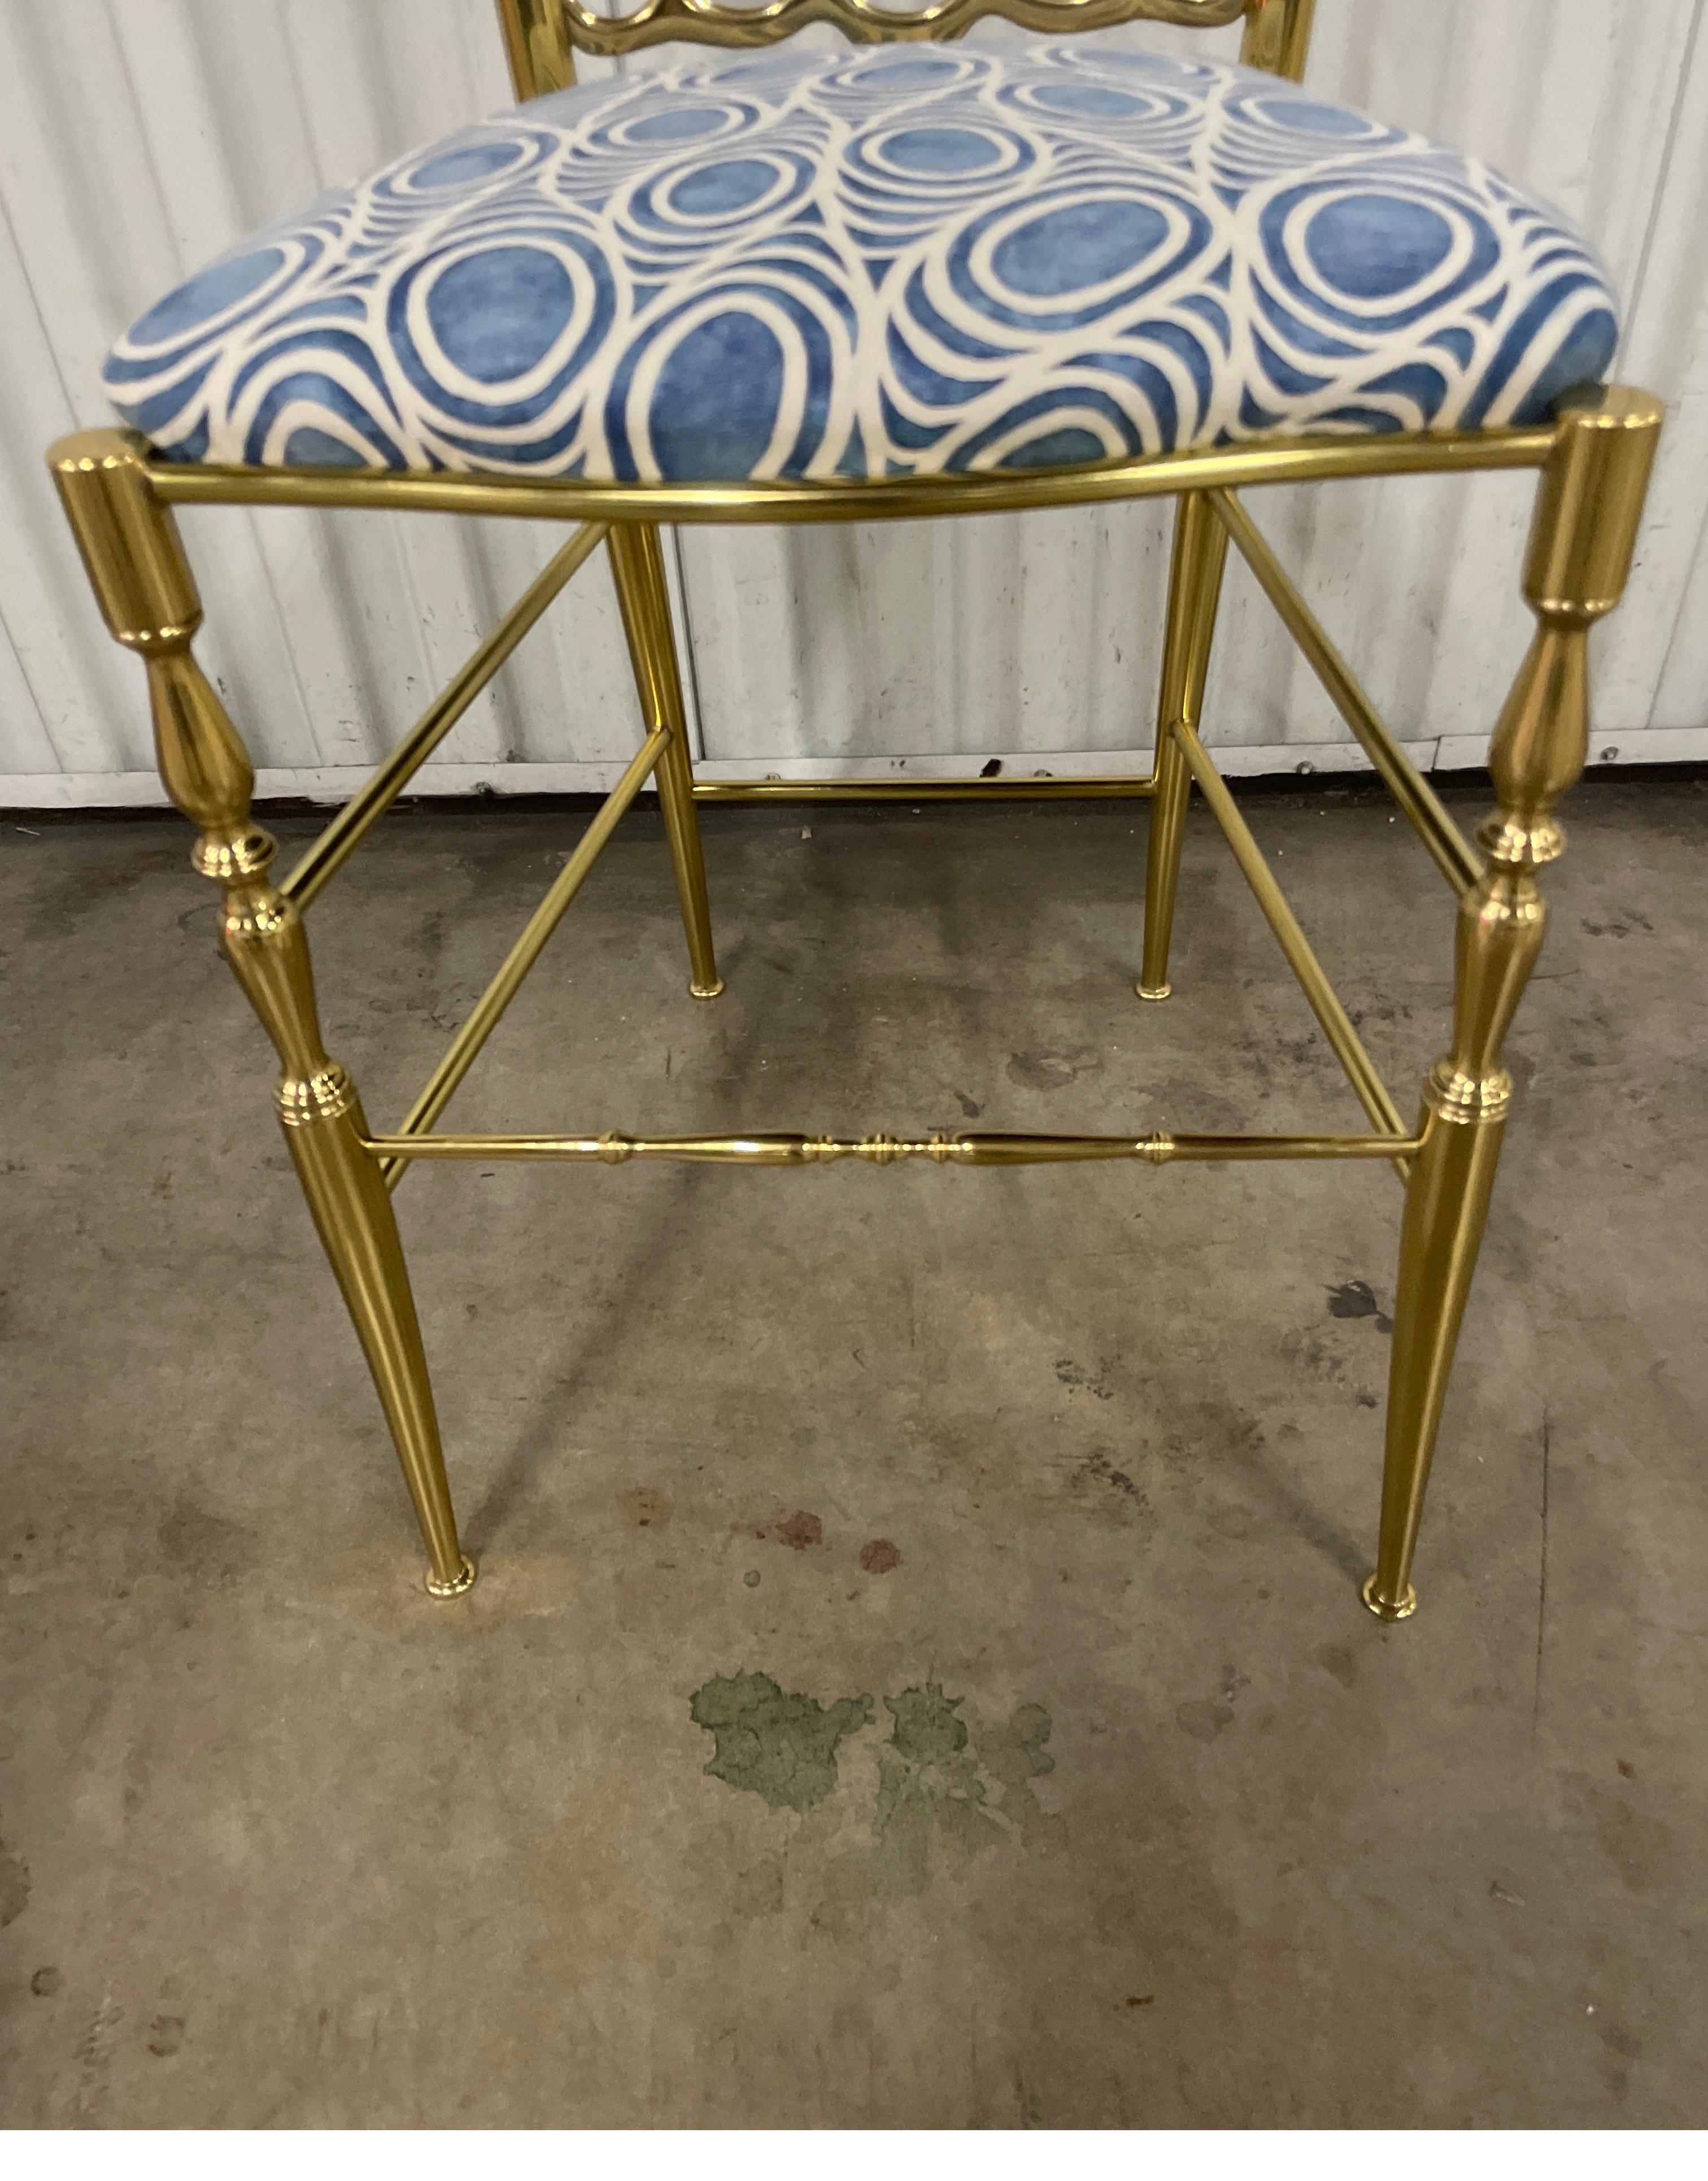 Vintage Solid Brass Italian Chiavari Chair with Fortuny Seat Covering For Sale 1